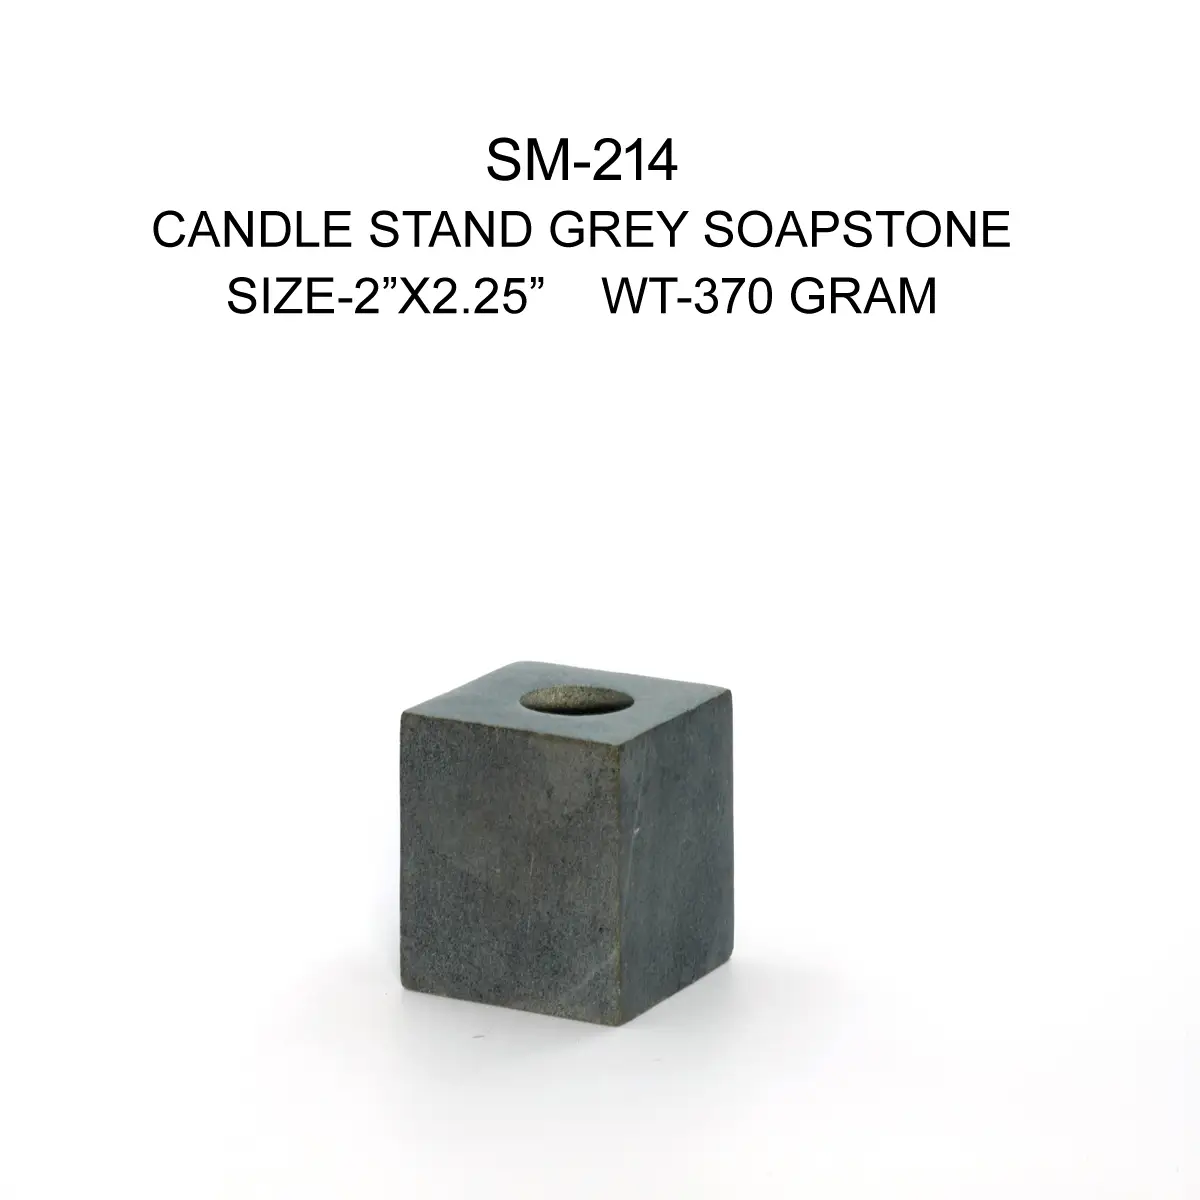 CANDLE STAND GREY SOAPSTONE